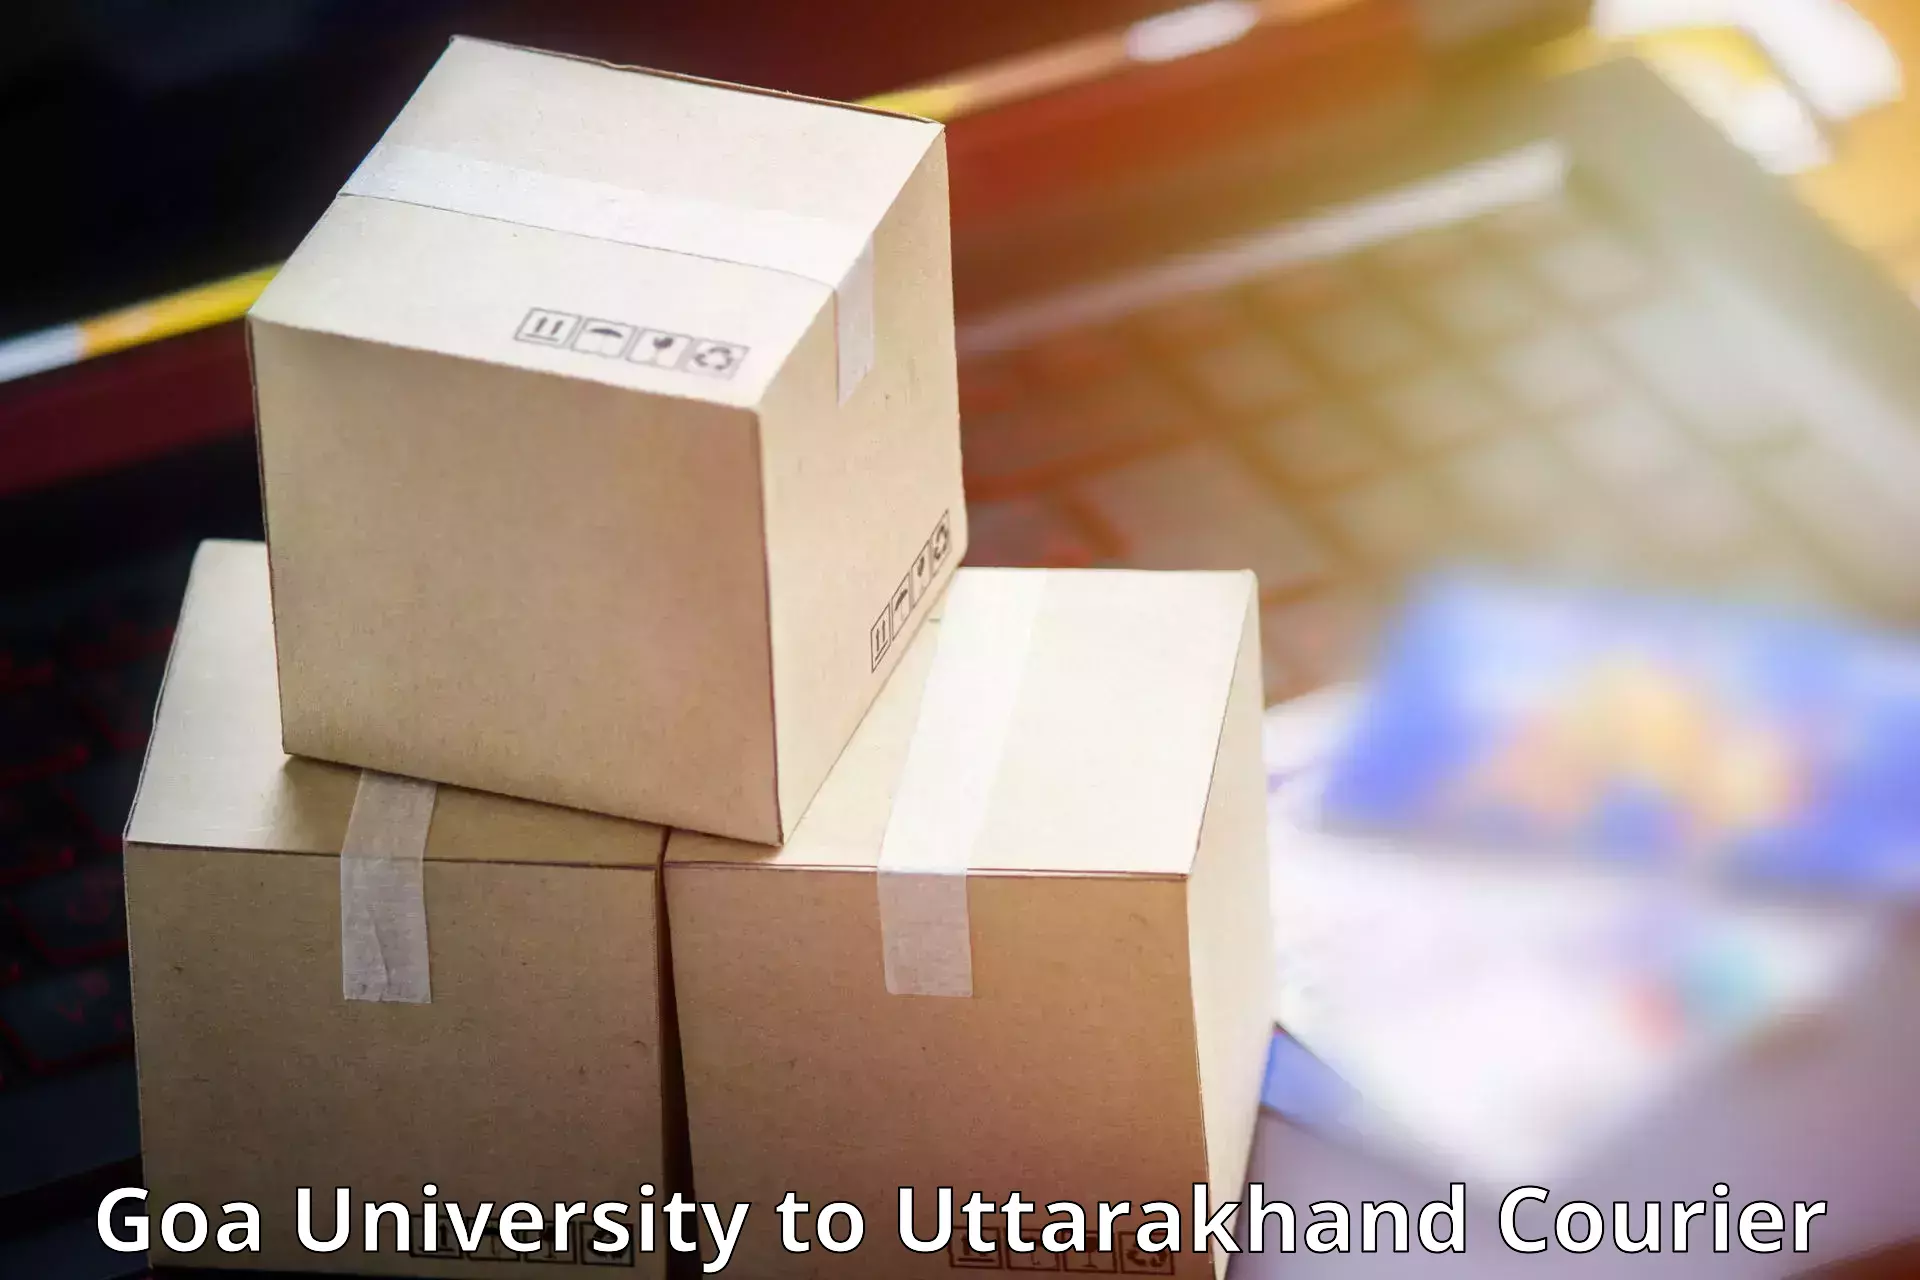 Trackable shipping service Goa University to IIT Roorkee